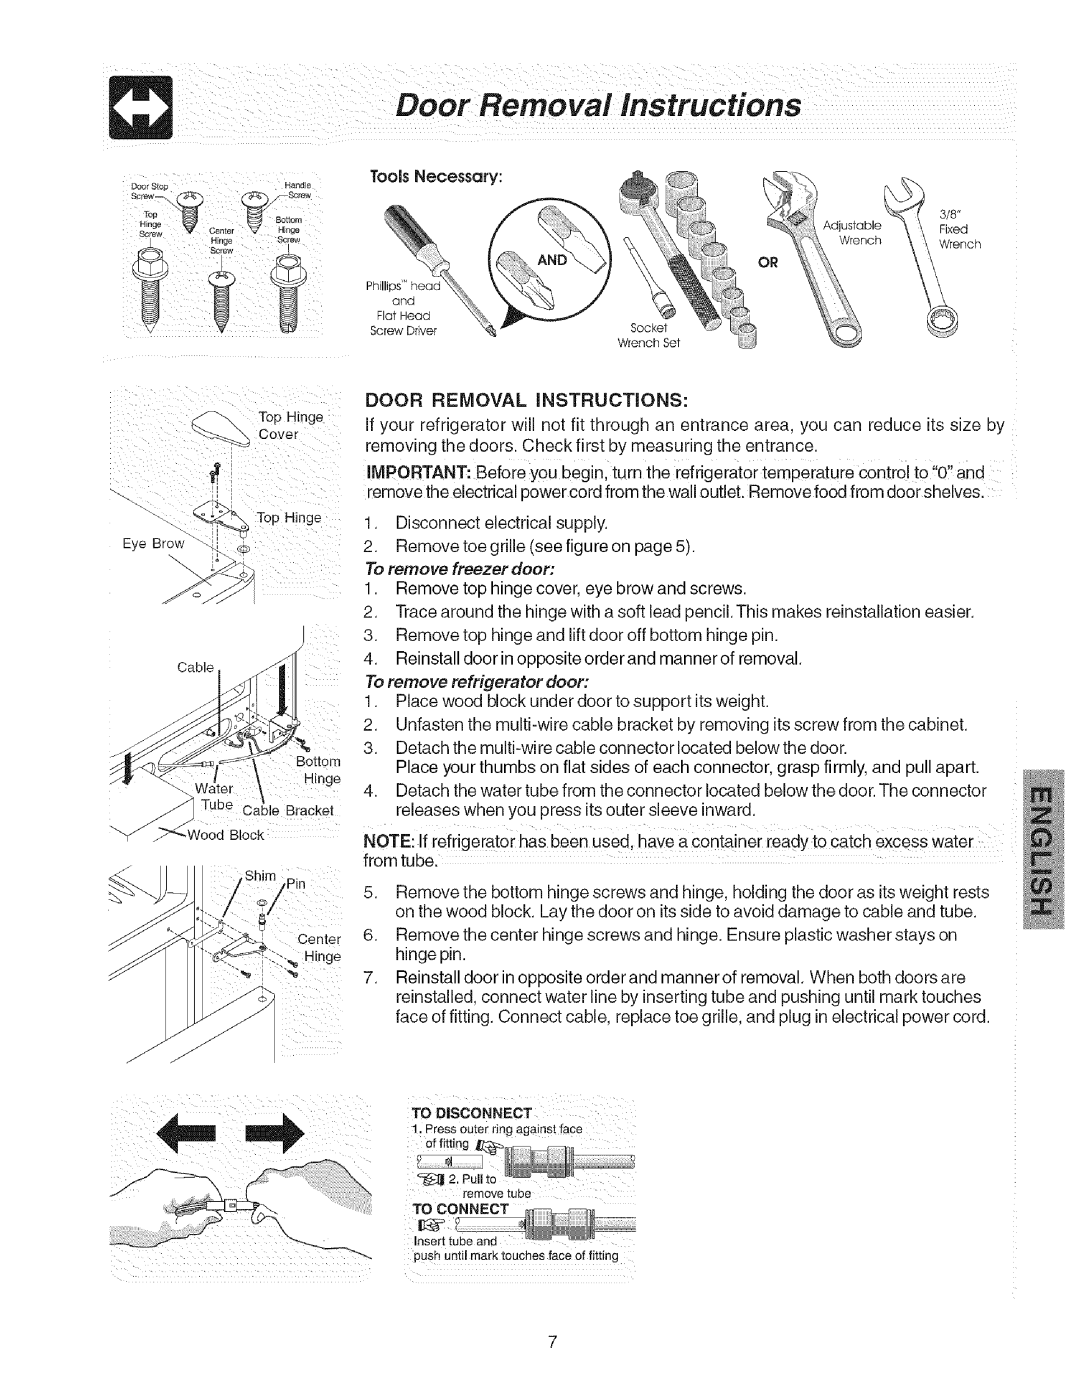 Kenmore 241858201 manual Door Removal instructions, ToD,sCo.EcT 